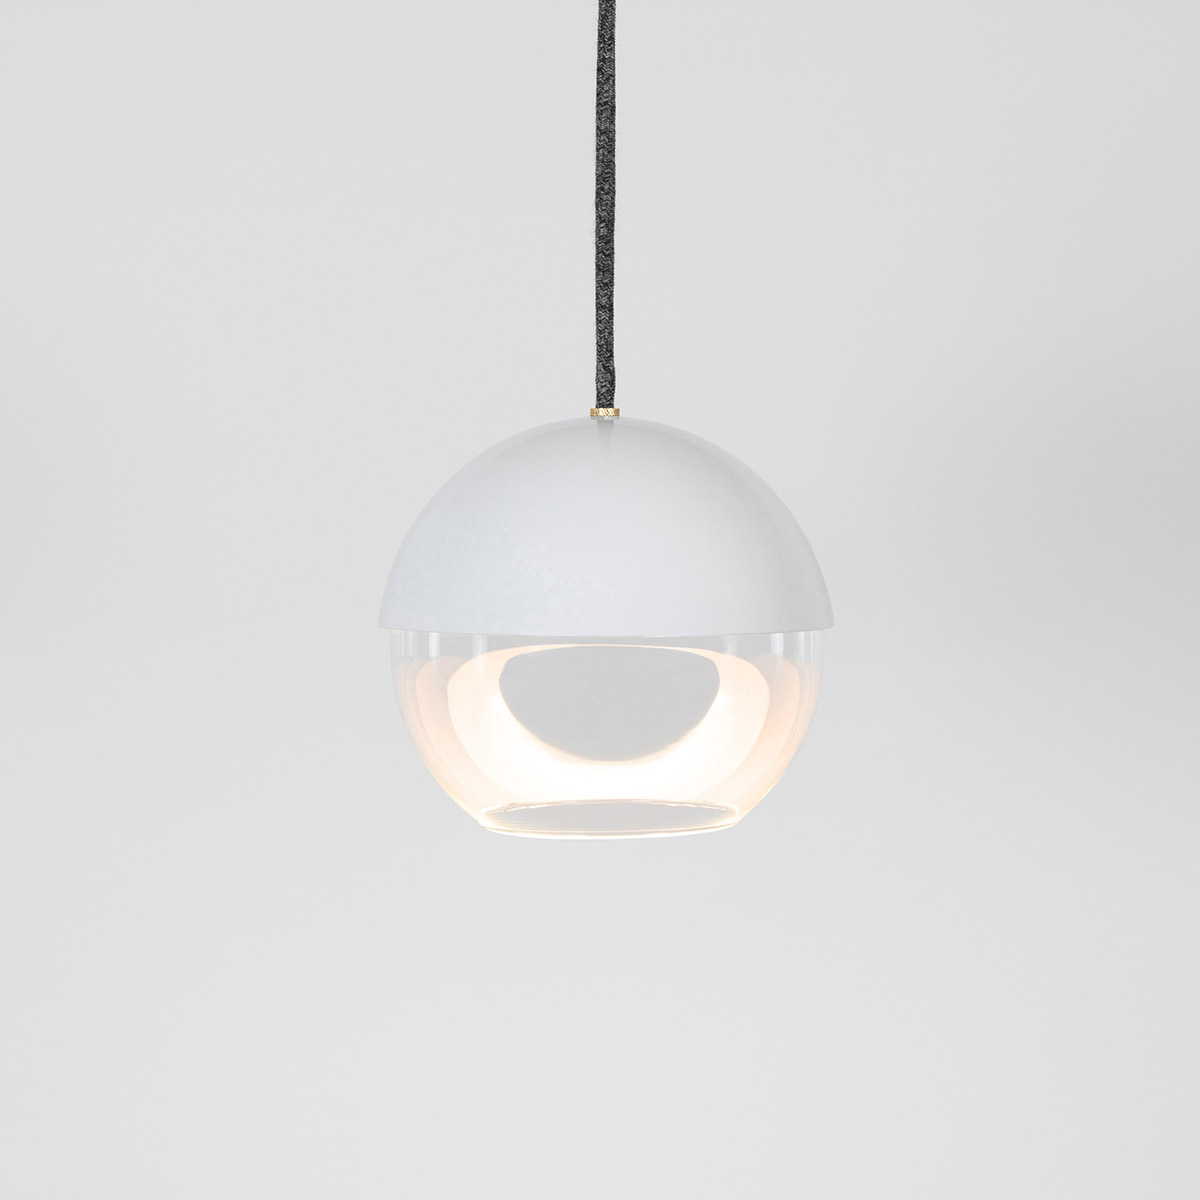 The 8” Muse pendant light globe utilizes a source disk that floats while reflecting indirect light.